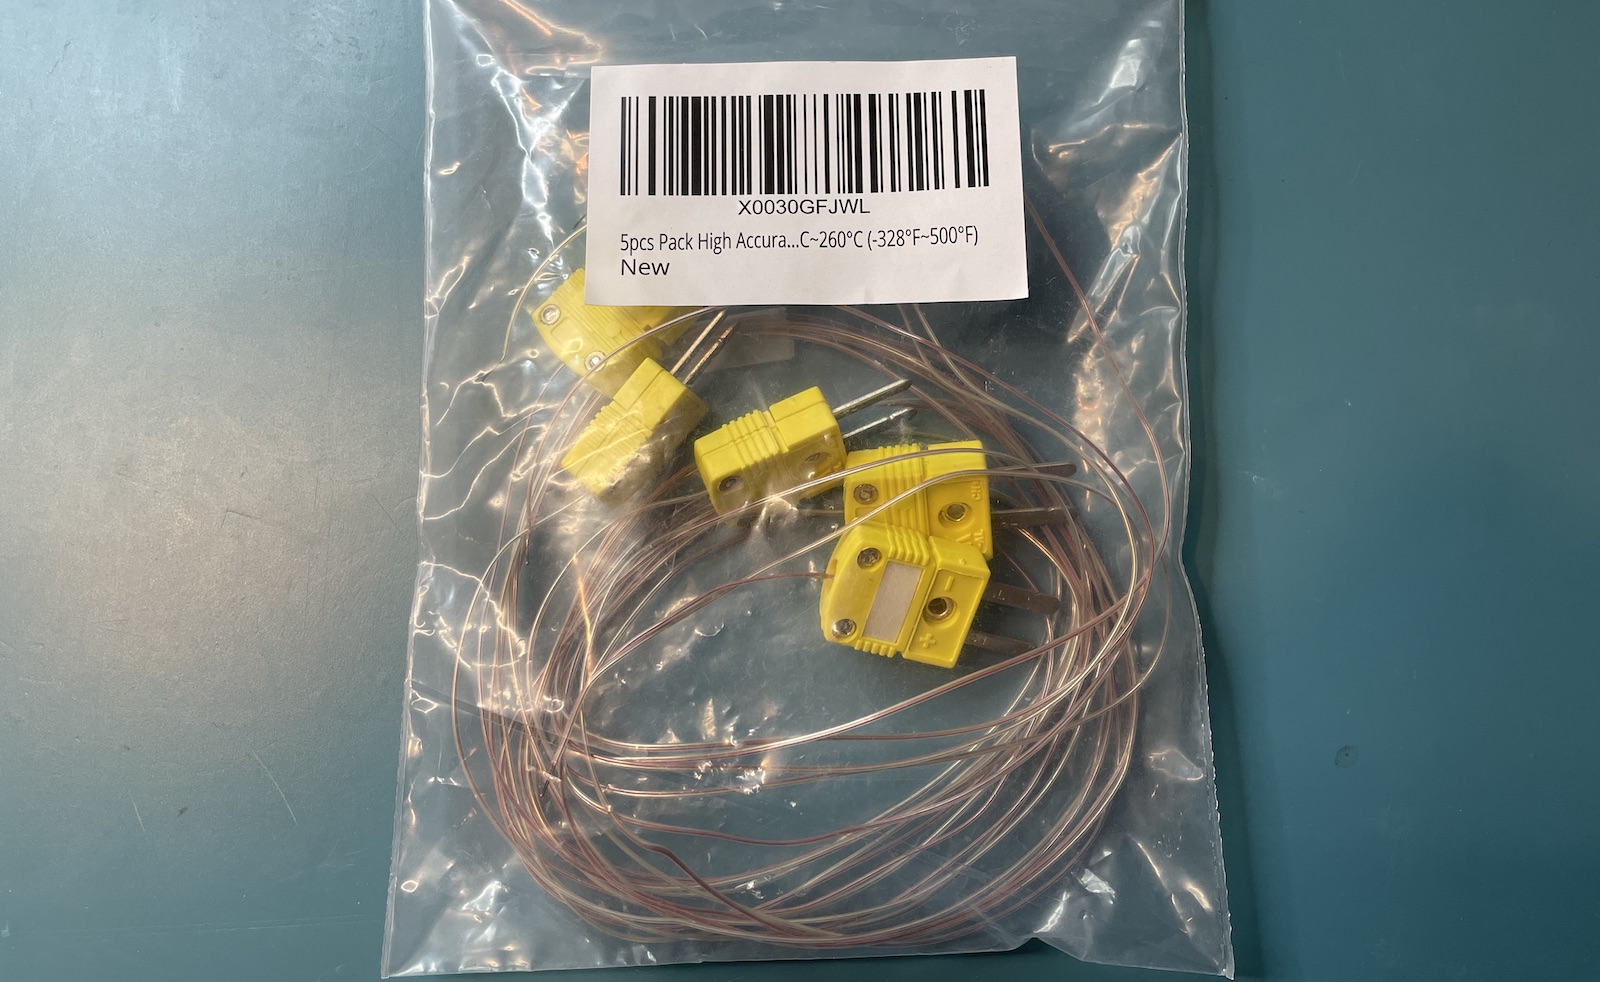 bag with thermocouples